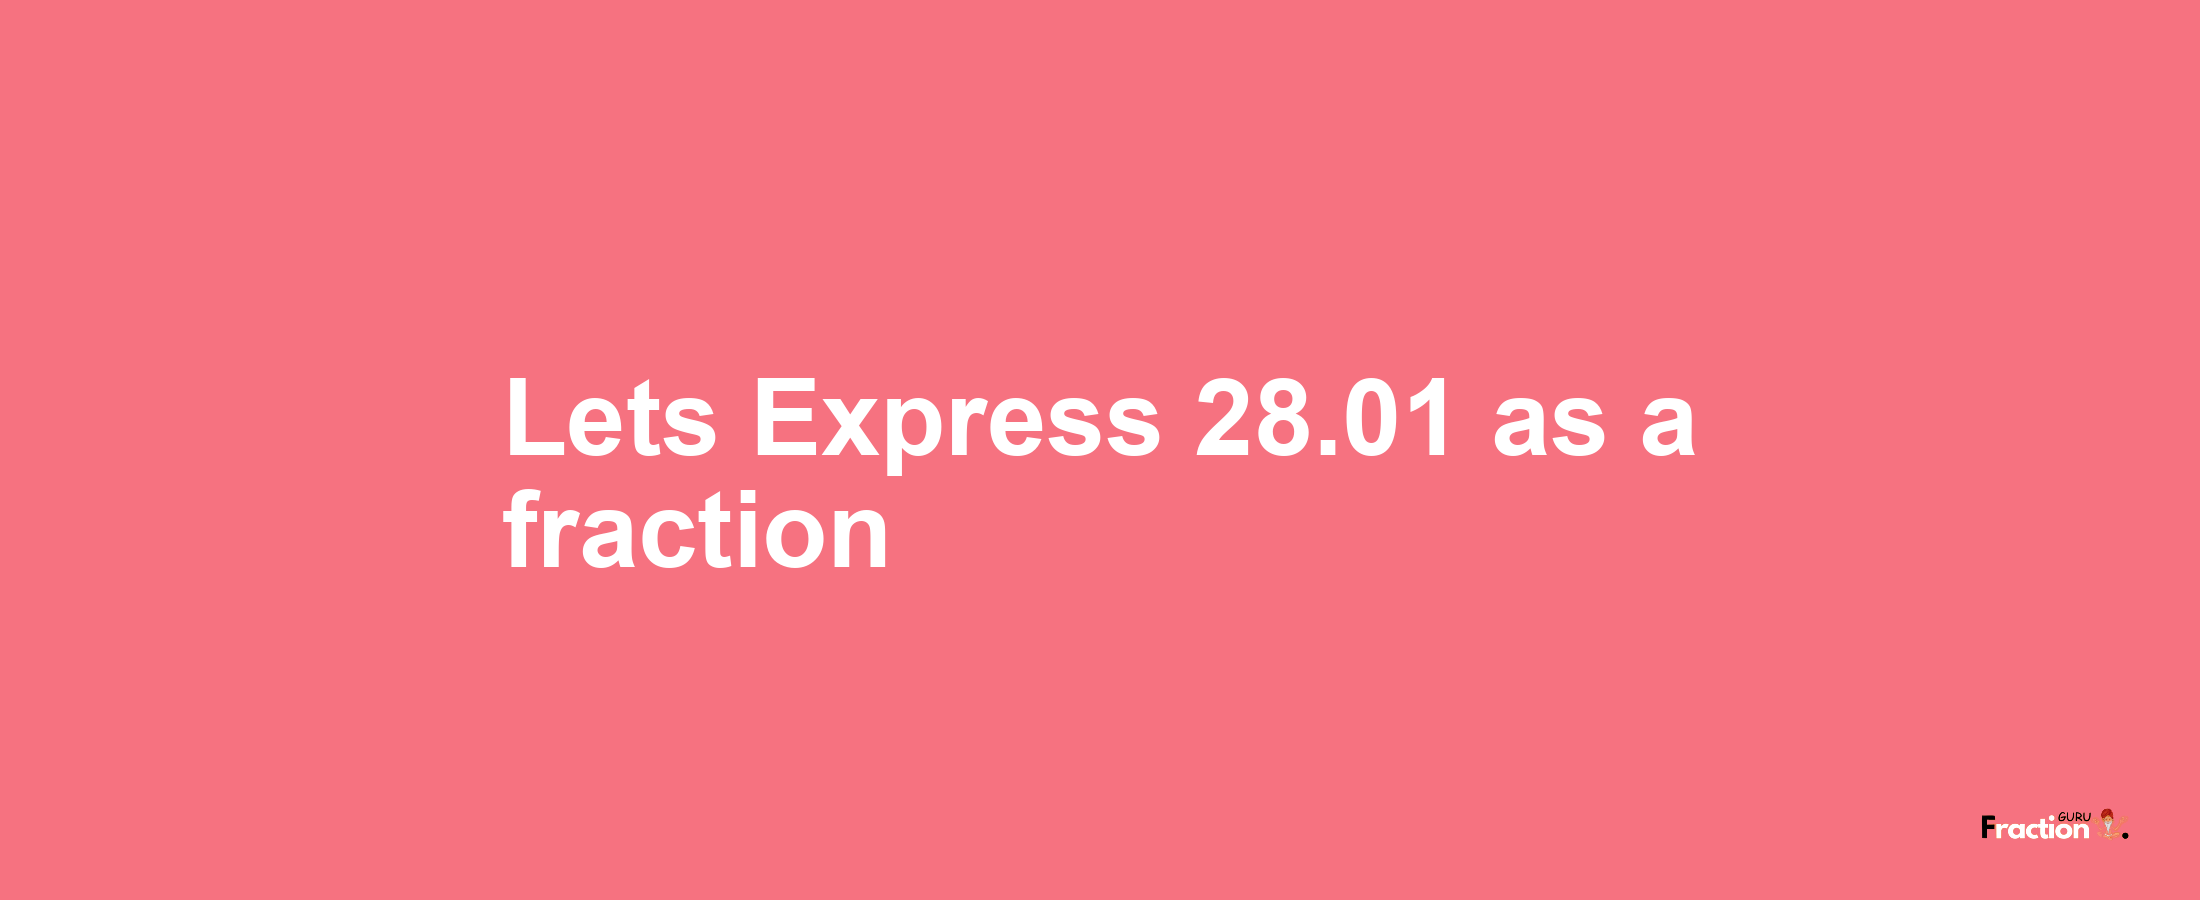 Lets Express 28.01 as afraction